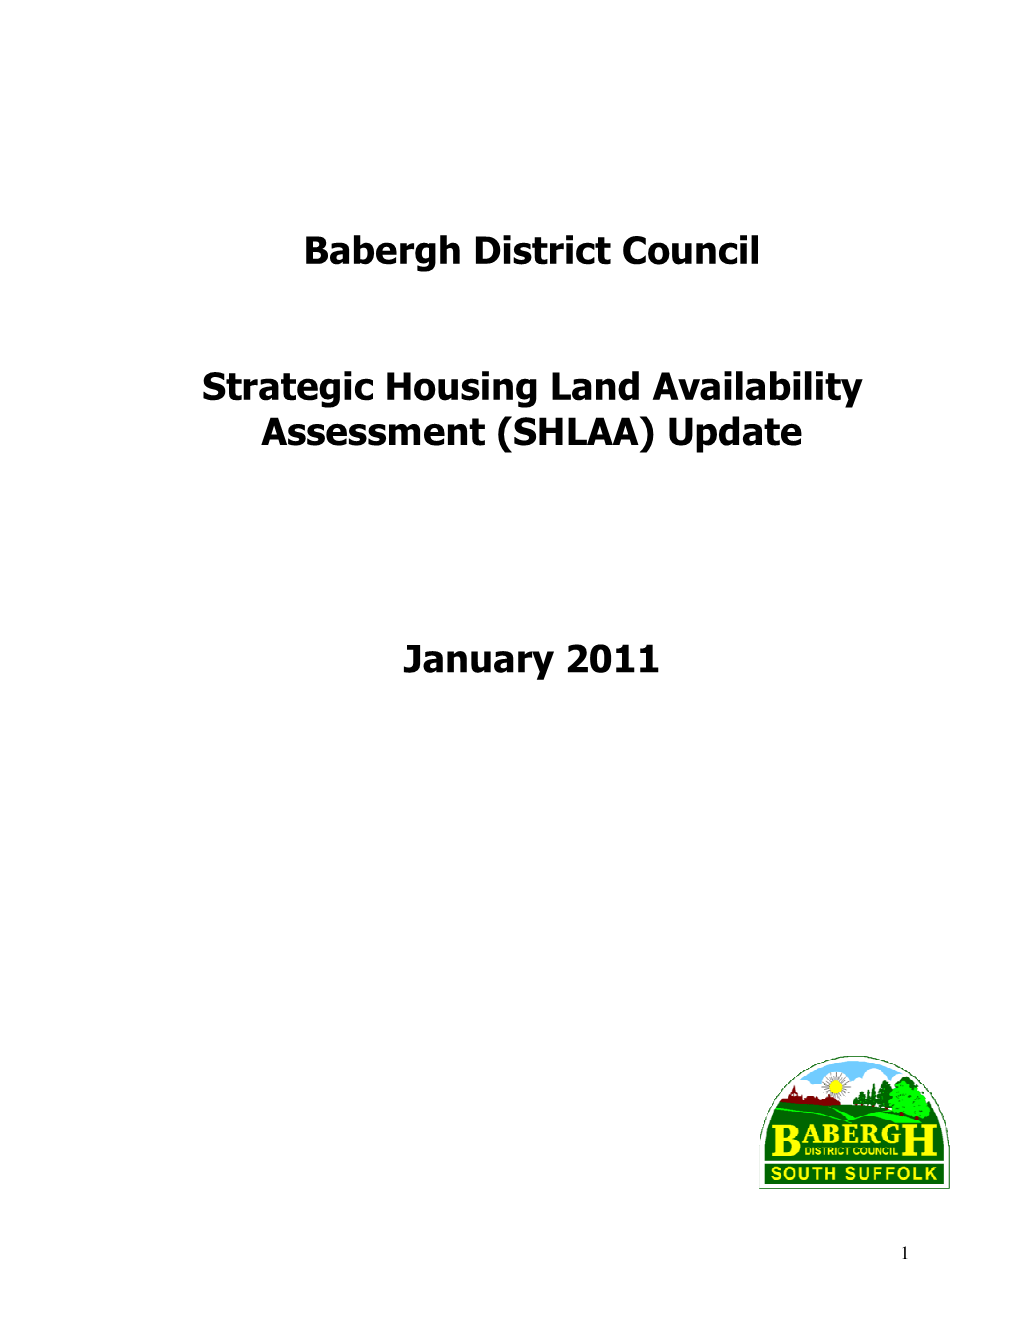 Babergh District Council Strategic Housing Land Availability Assessment (SHLAA) Report